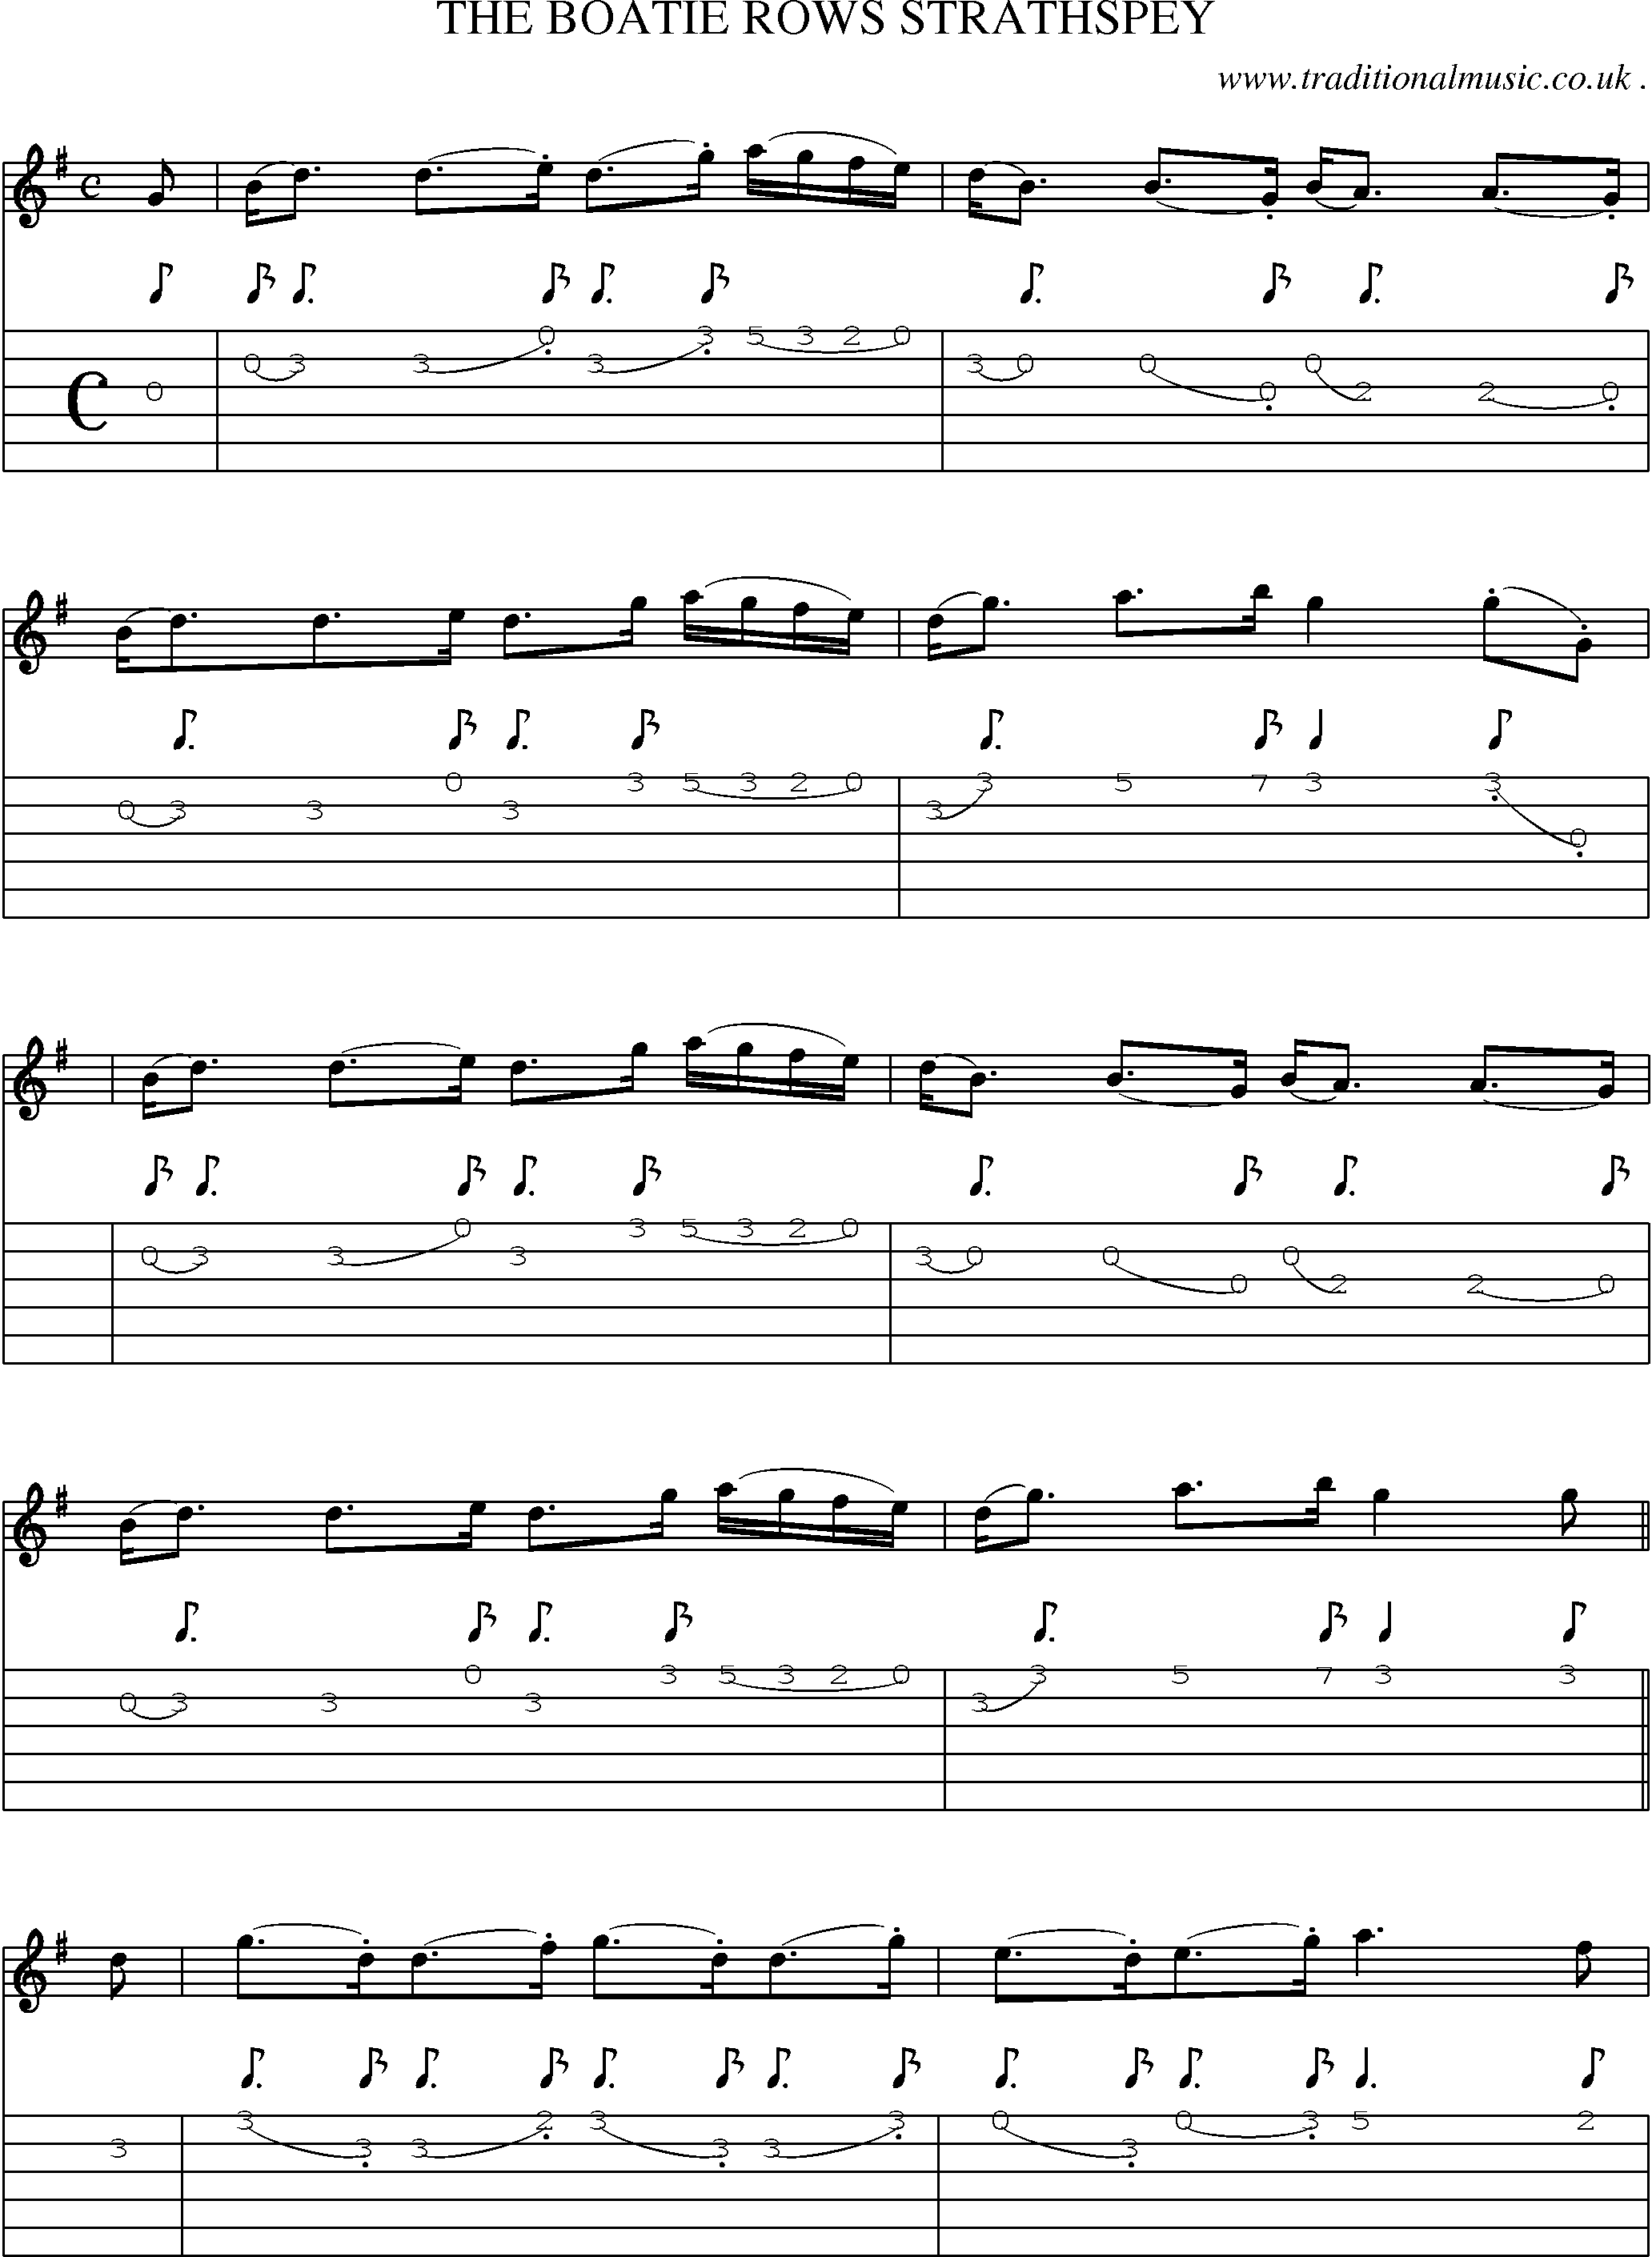 Sheet-Music and Guitar Tabs for The Boatie Rows Strathspey